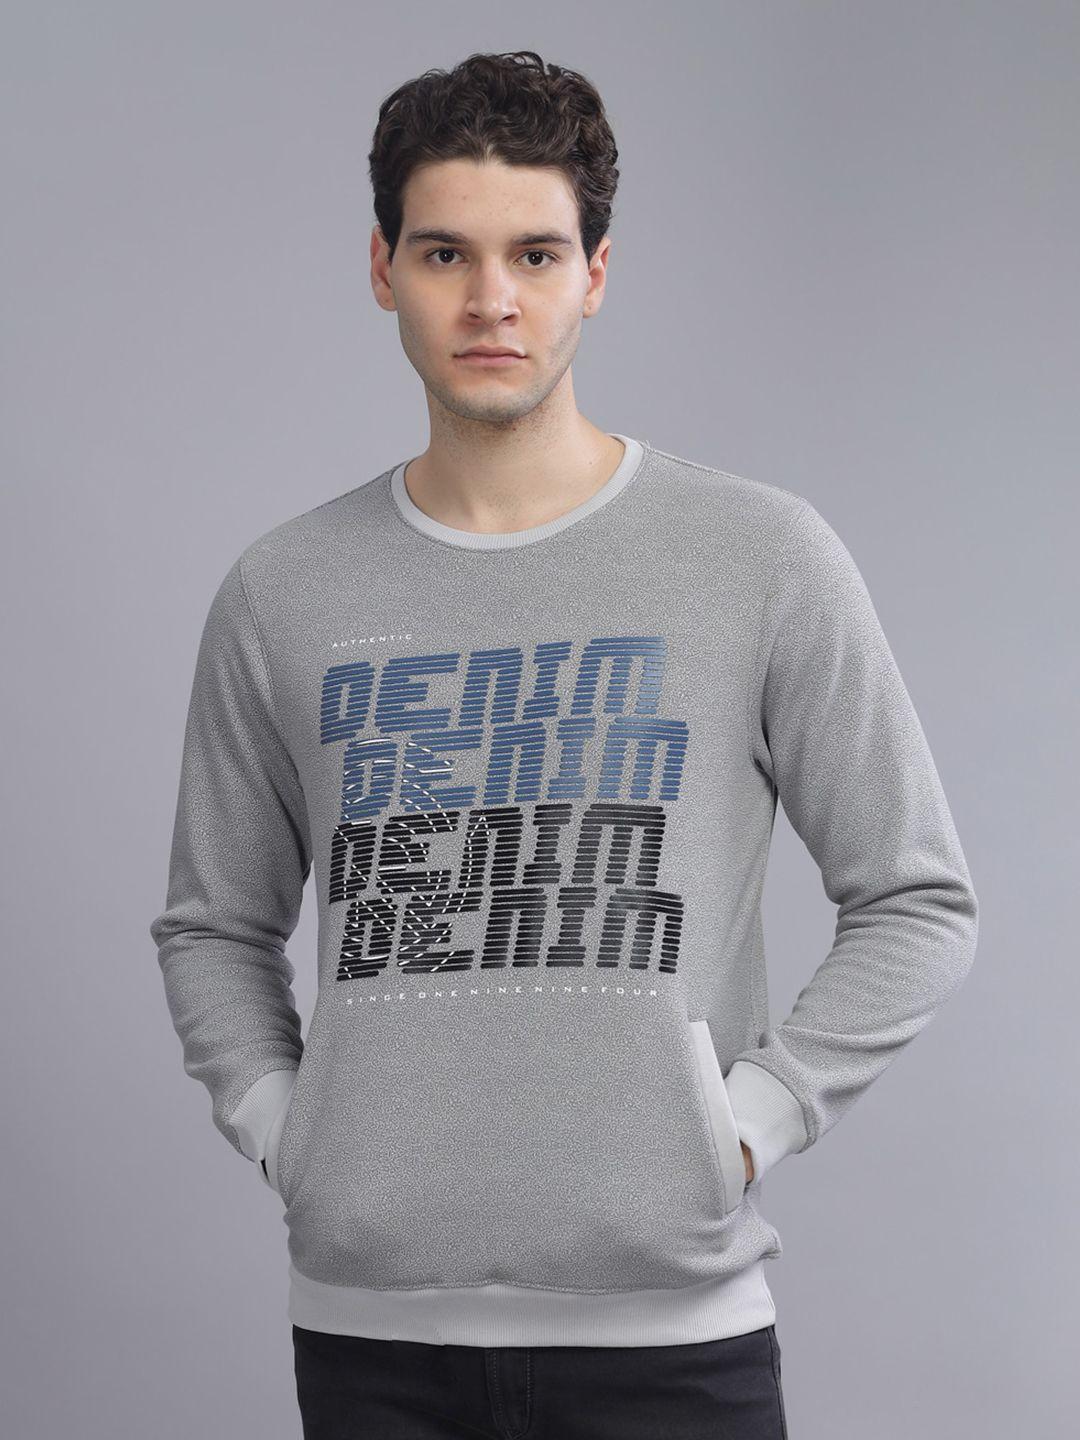 parcel yard typography printed fleece anti odour pullover